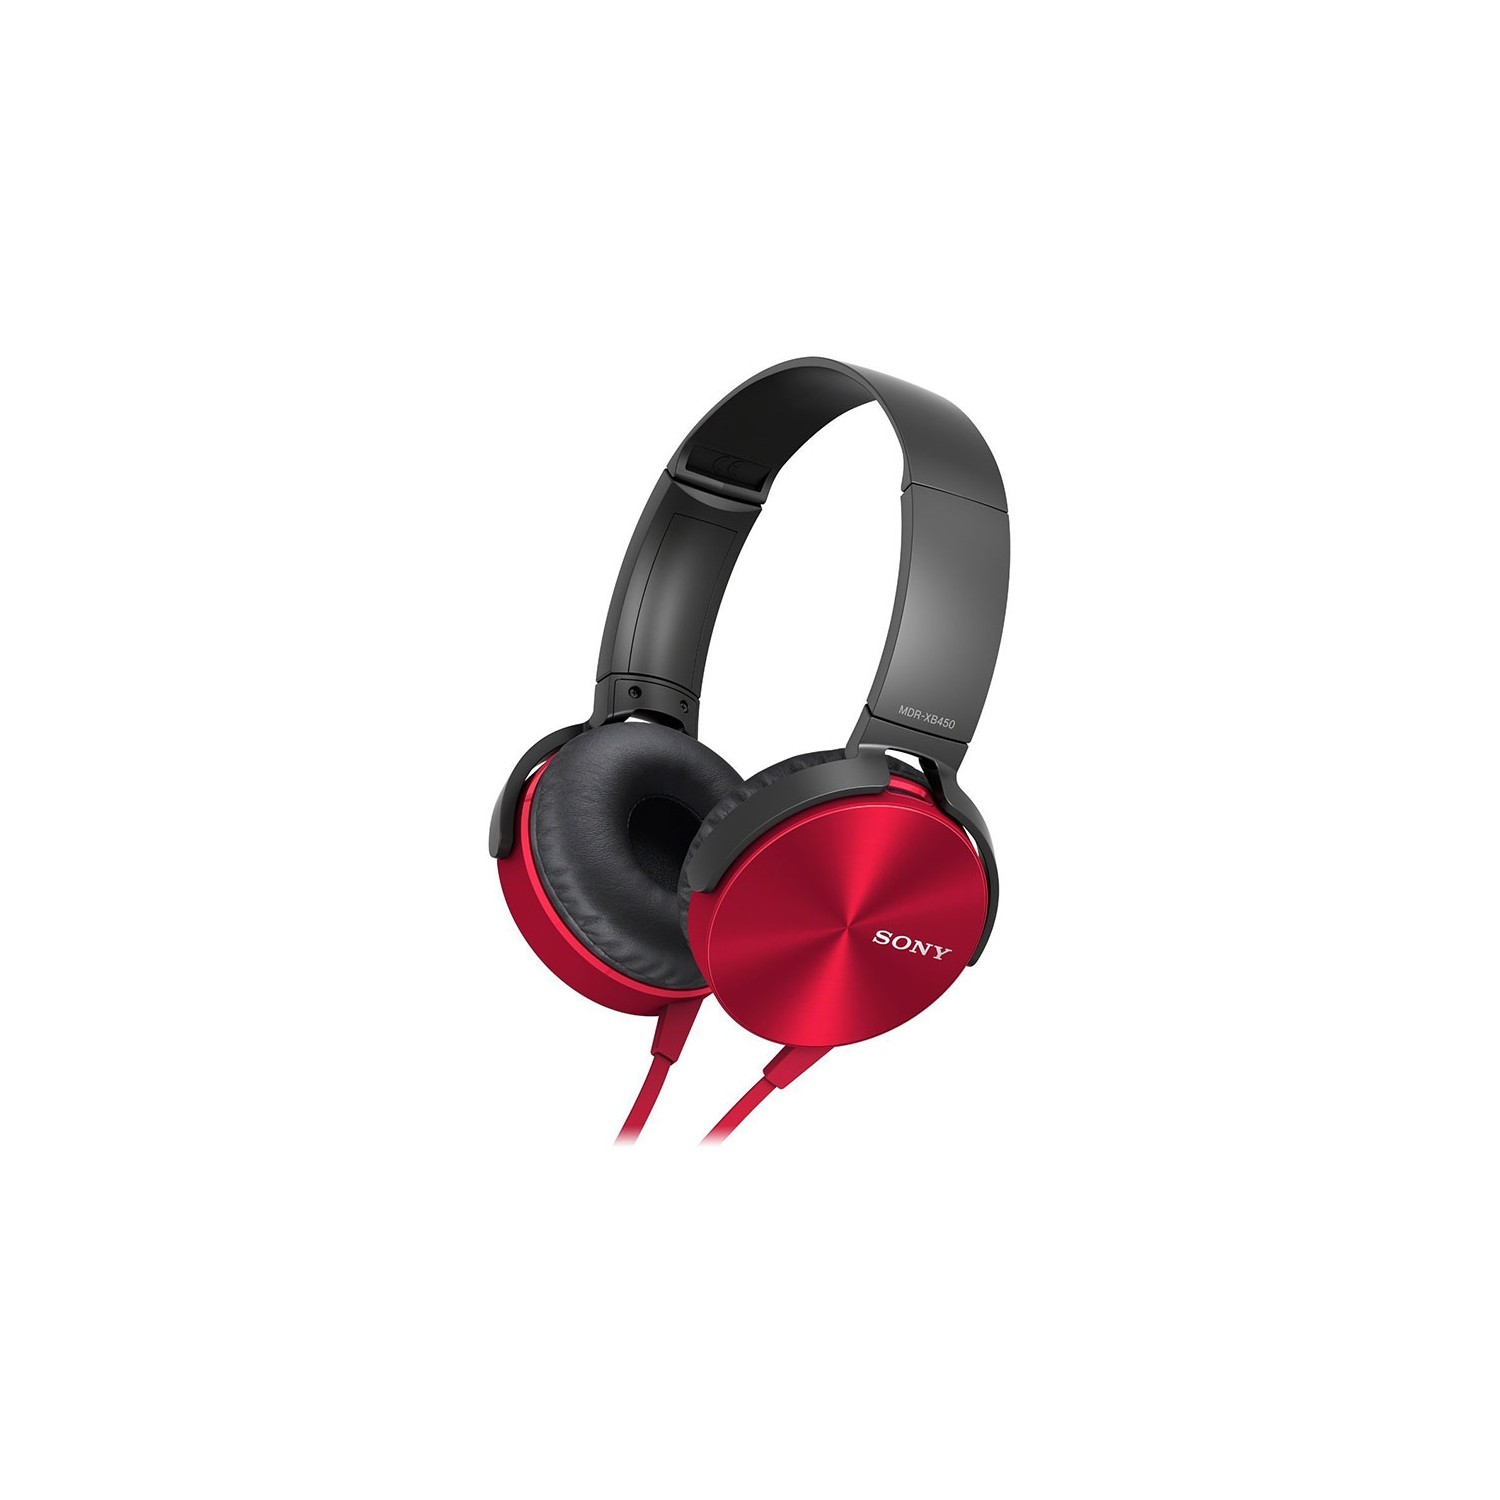 Sony MDRXB450APR Red Extra Bass Headphones for iPhone and Android